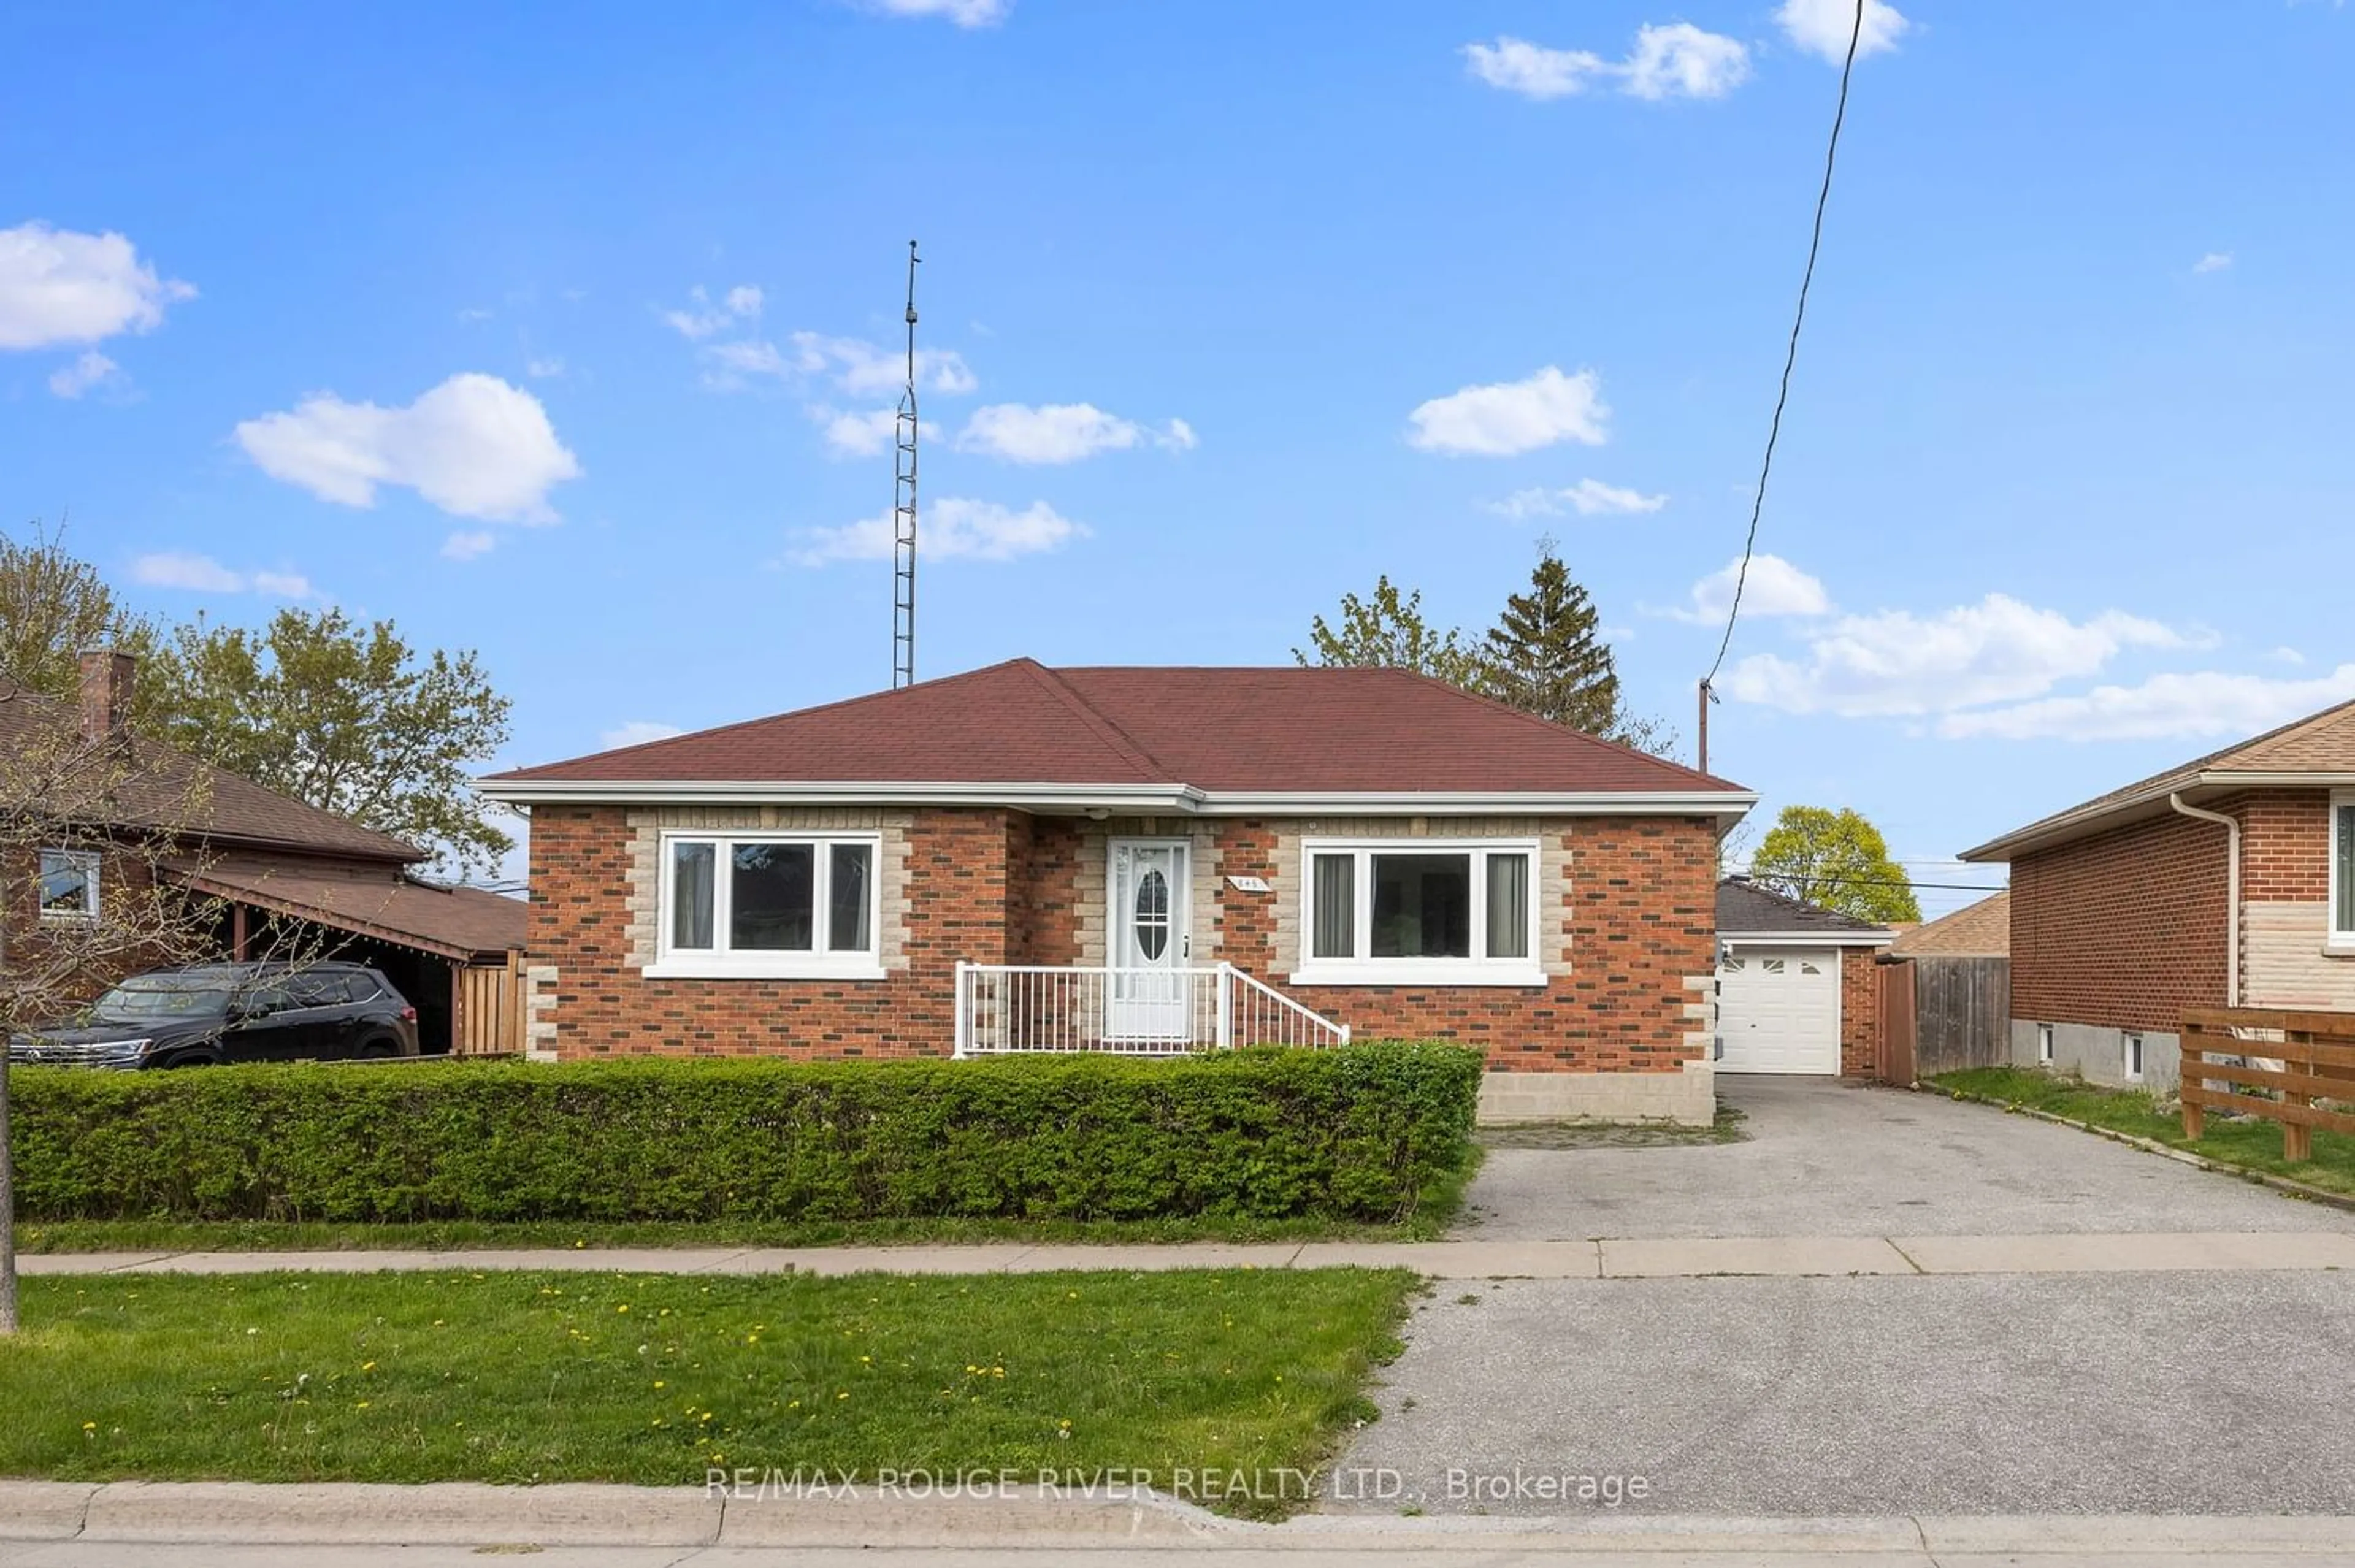 Home with brick exterior material for 845 Sylvia St, Oshawa Ontario L1H 5M5